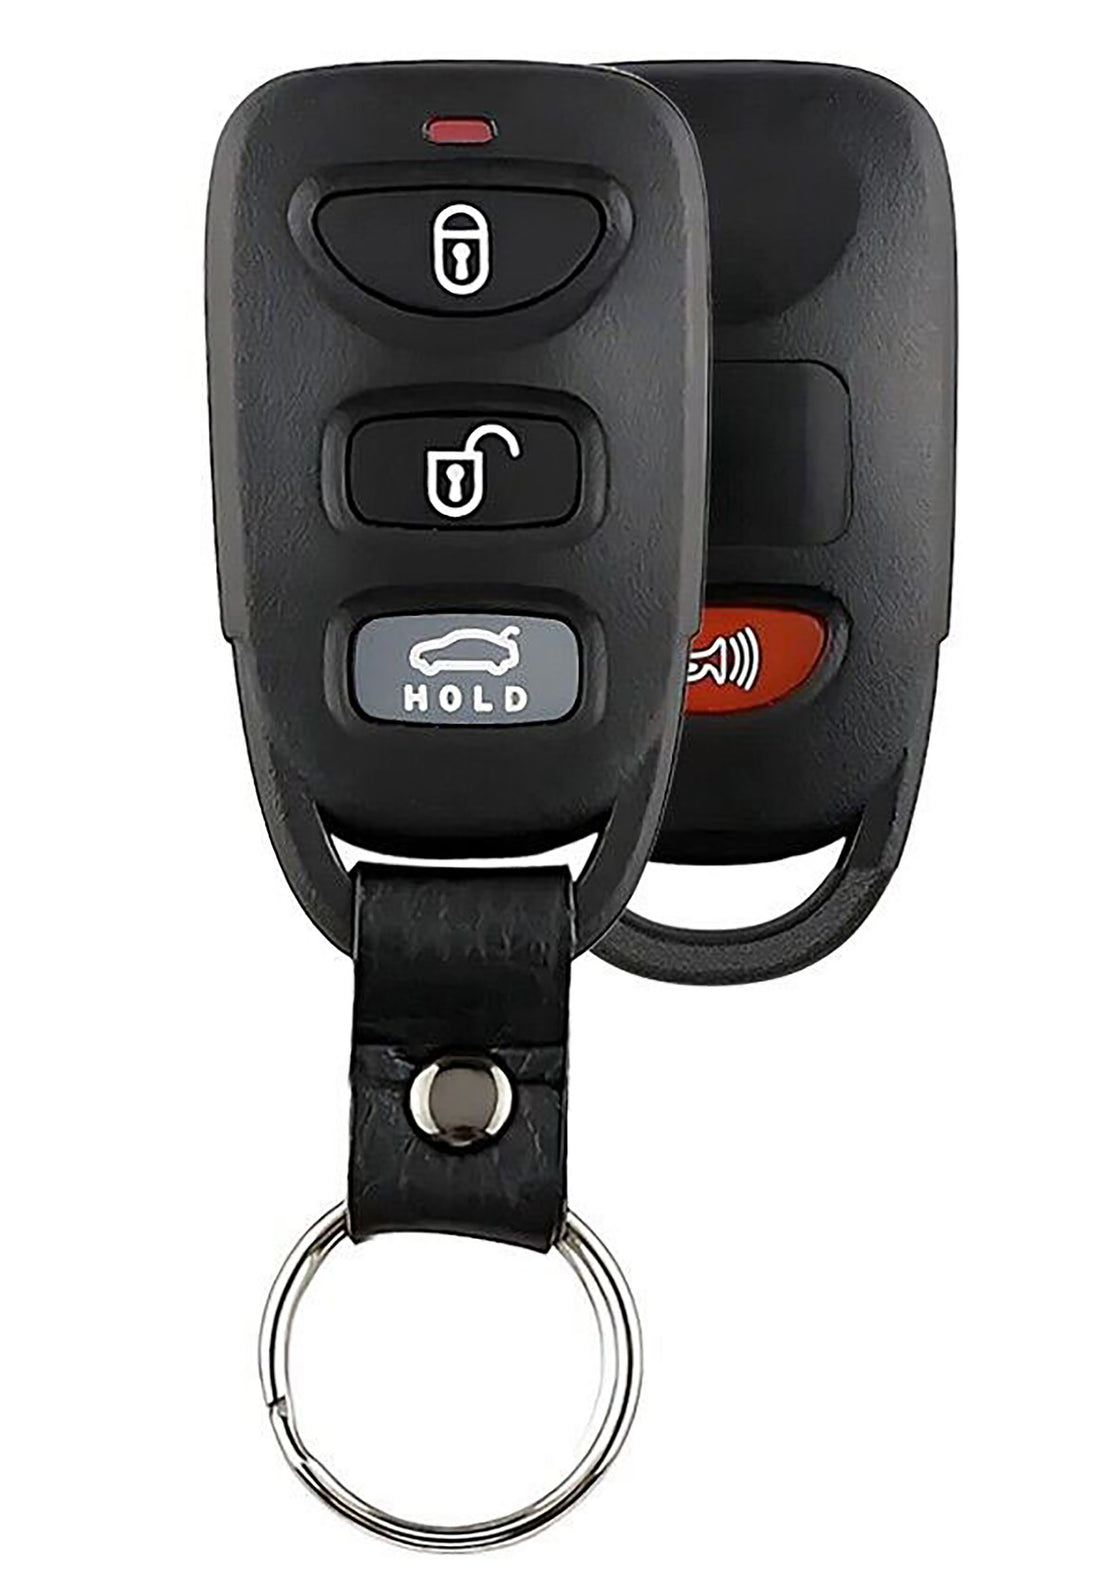 1x New Replacement Key Fob Remote Compatible with & Fit For 2011-2016 Hyundai Elantra. OSLOKA-360T - MPN OSLOKA-360T-02